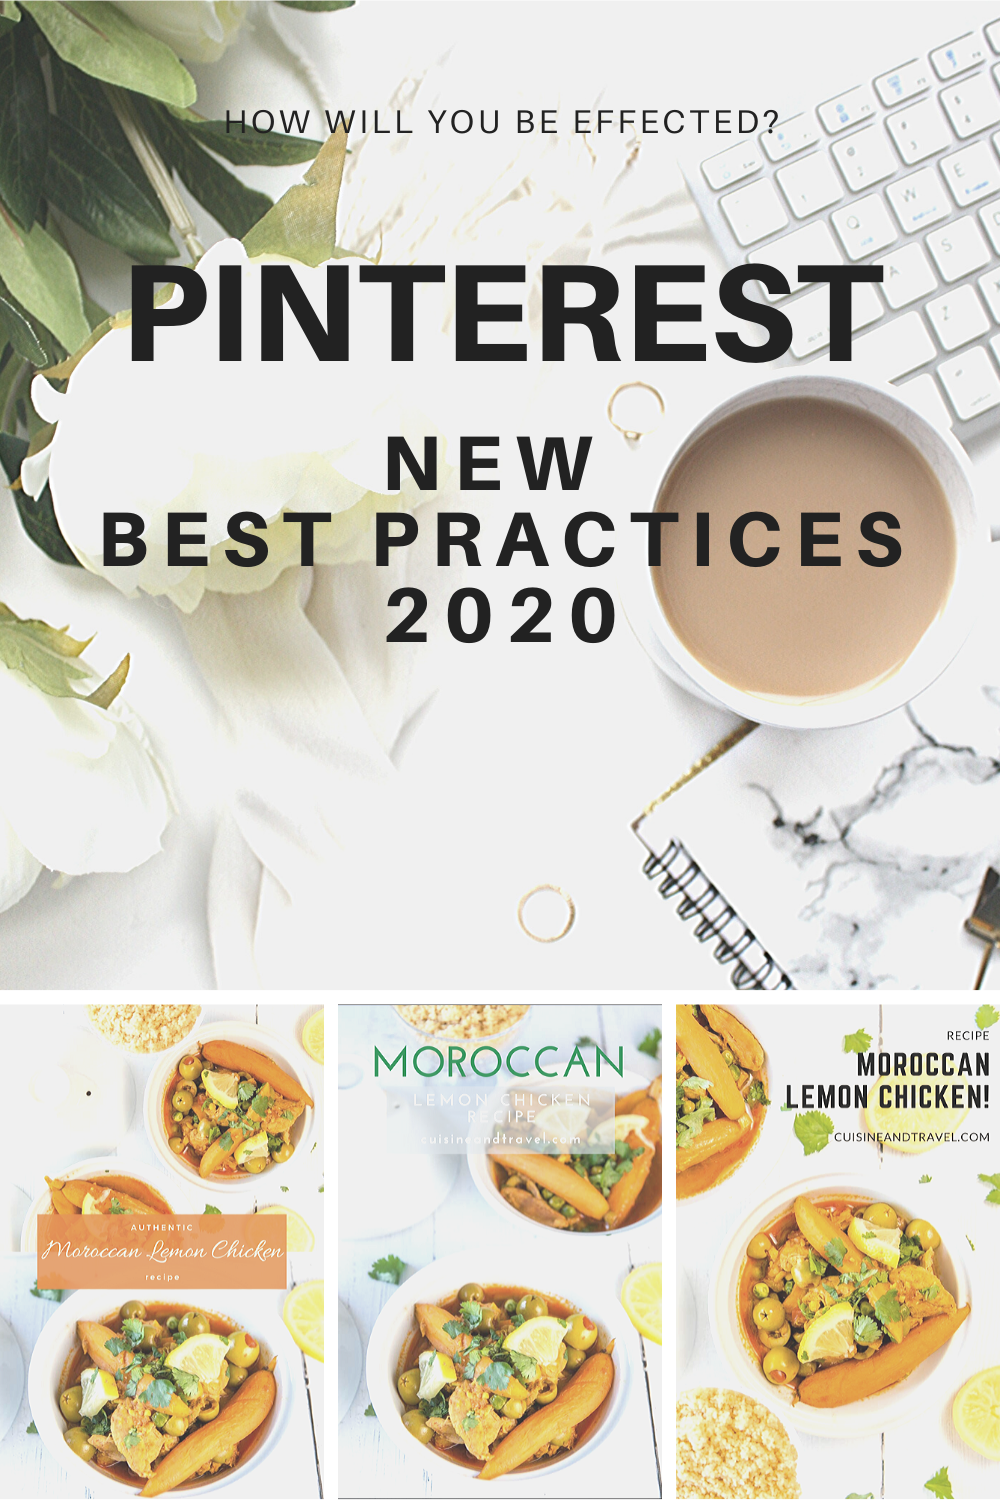 How Will The New Pinterest Best Practices 2020 and Algorithm Changes Effect You